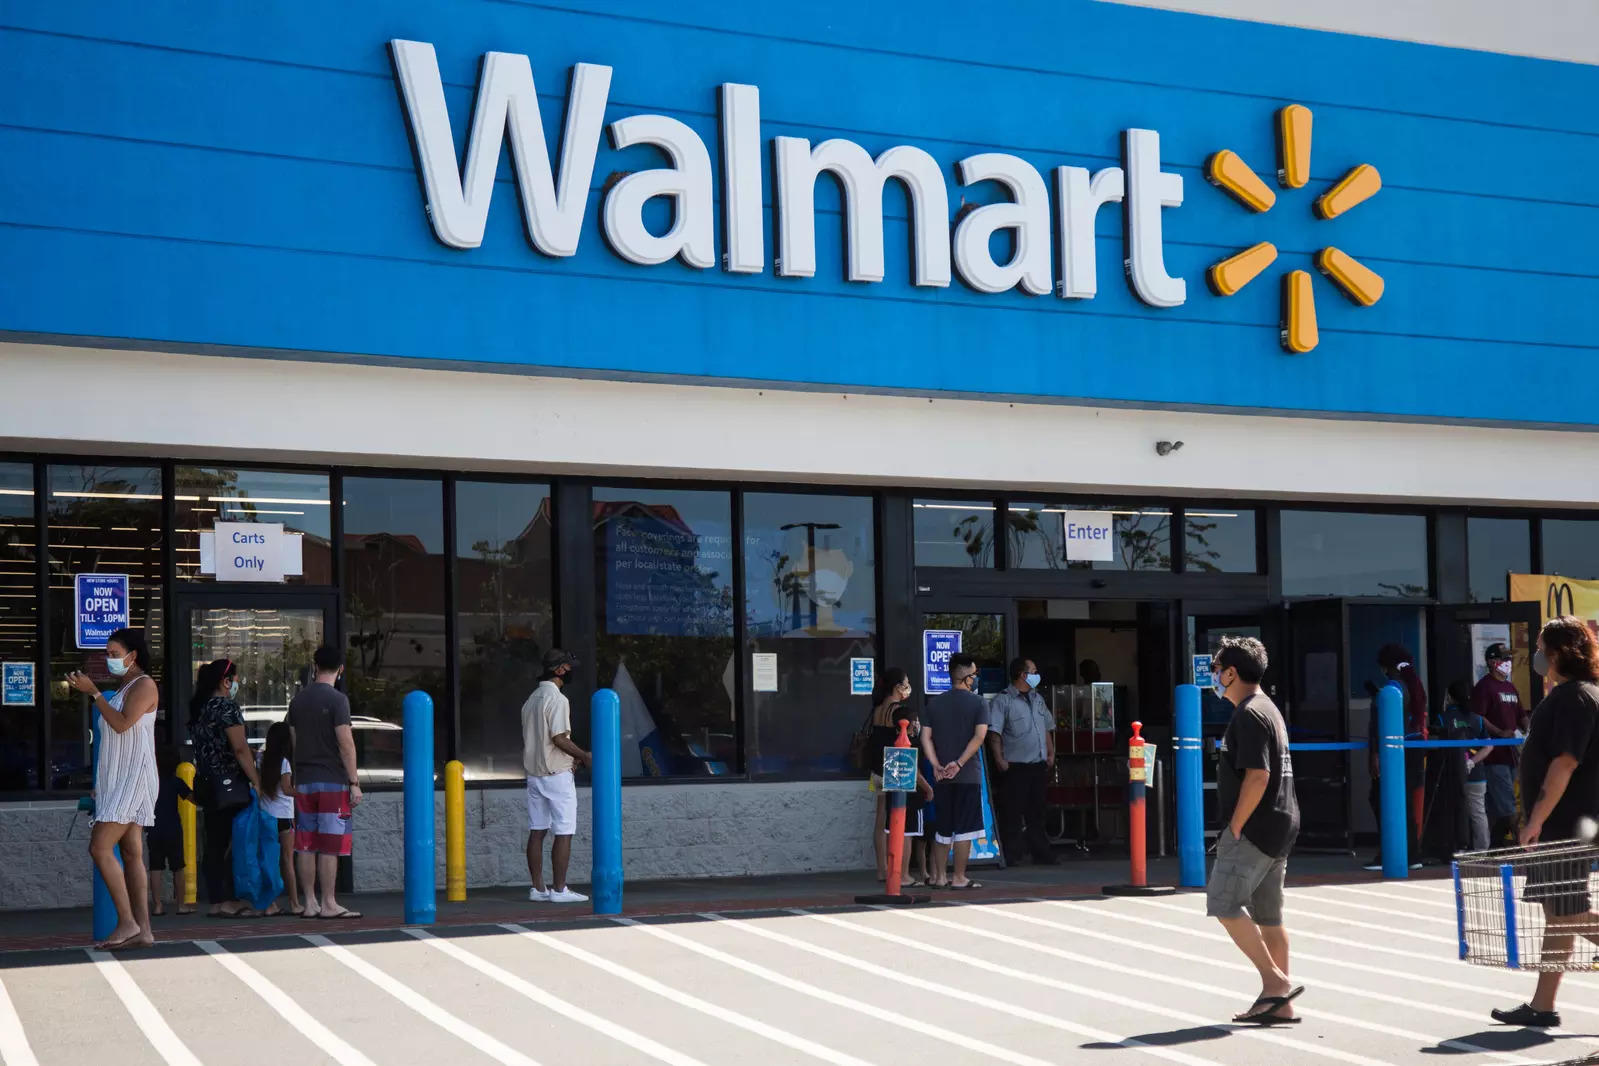 Can You Use Venmo At Walmart to Pay?